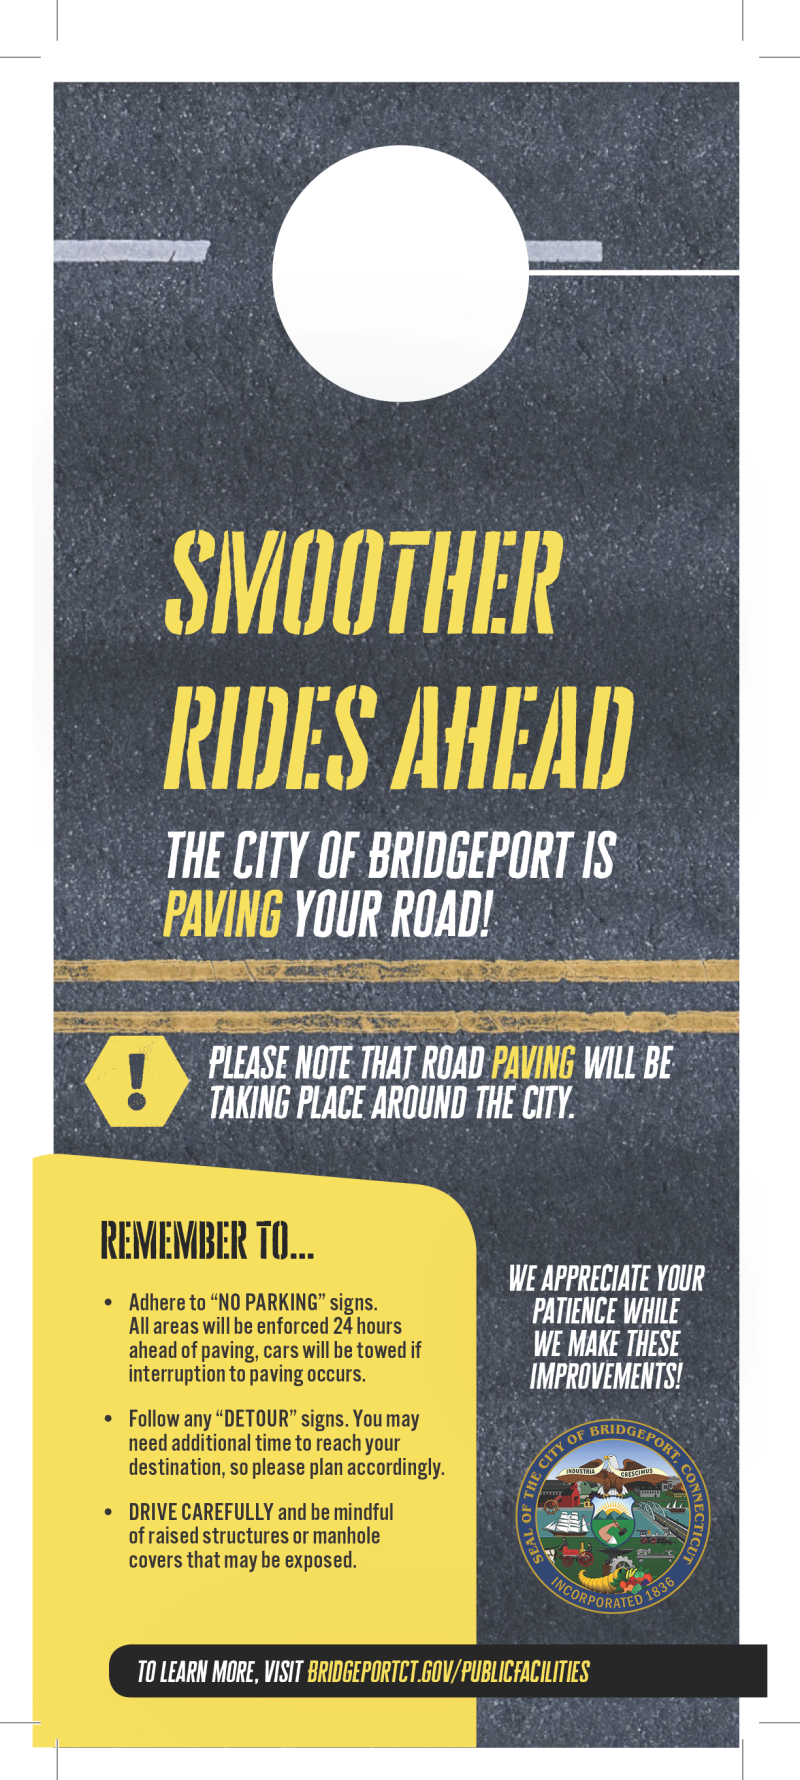 The City of Bridgeport's Smooth Rides Ahead door hanger, alerting residents to the milling & Paving and directing them to the City website for real-time information.